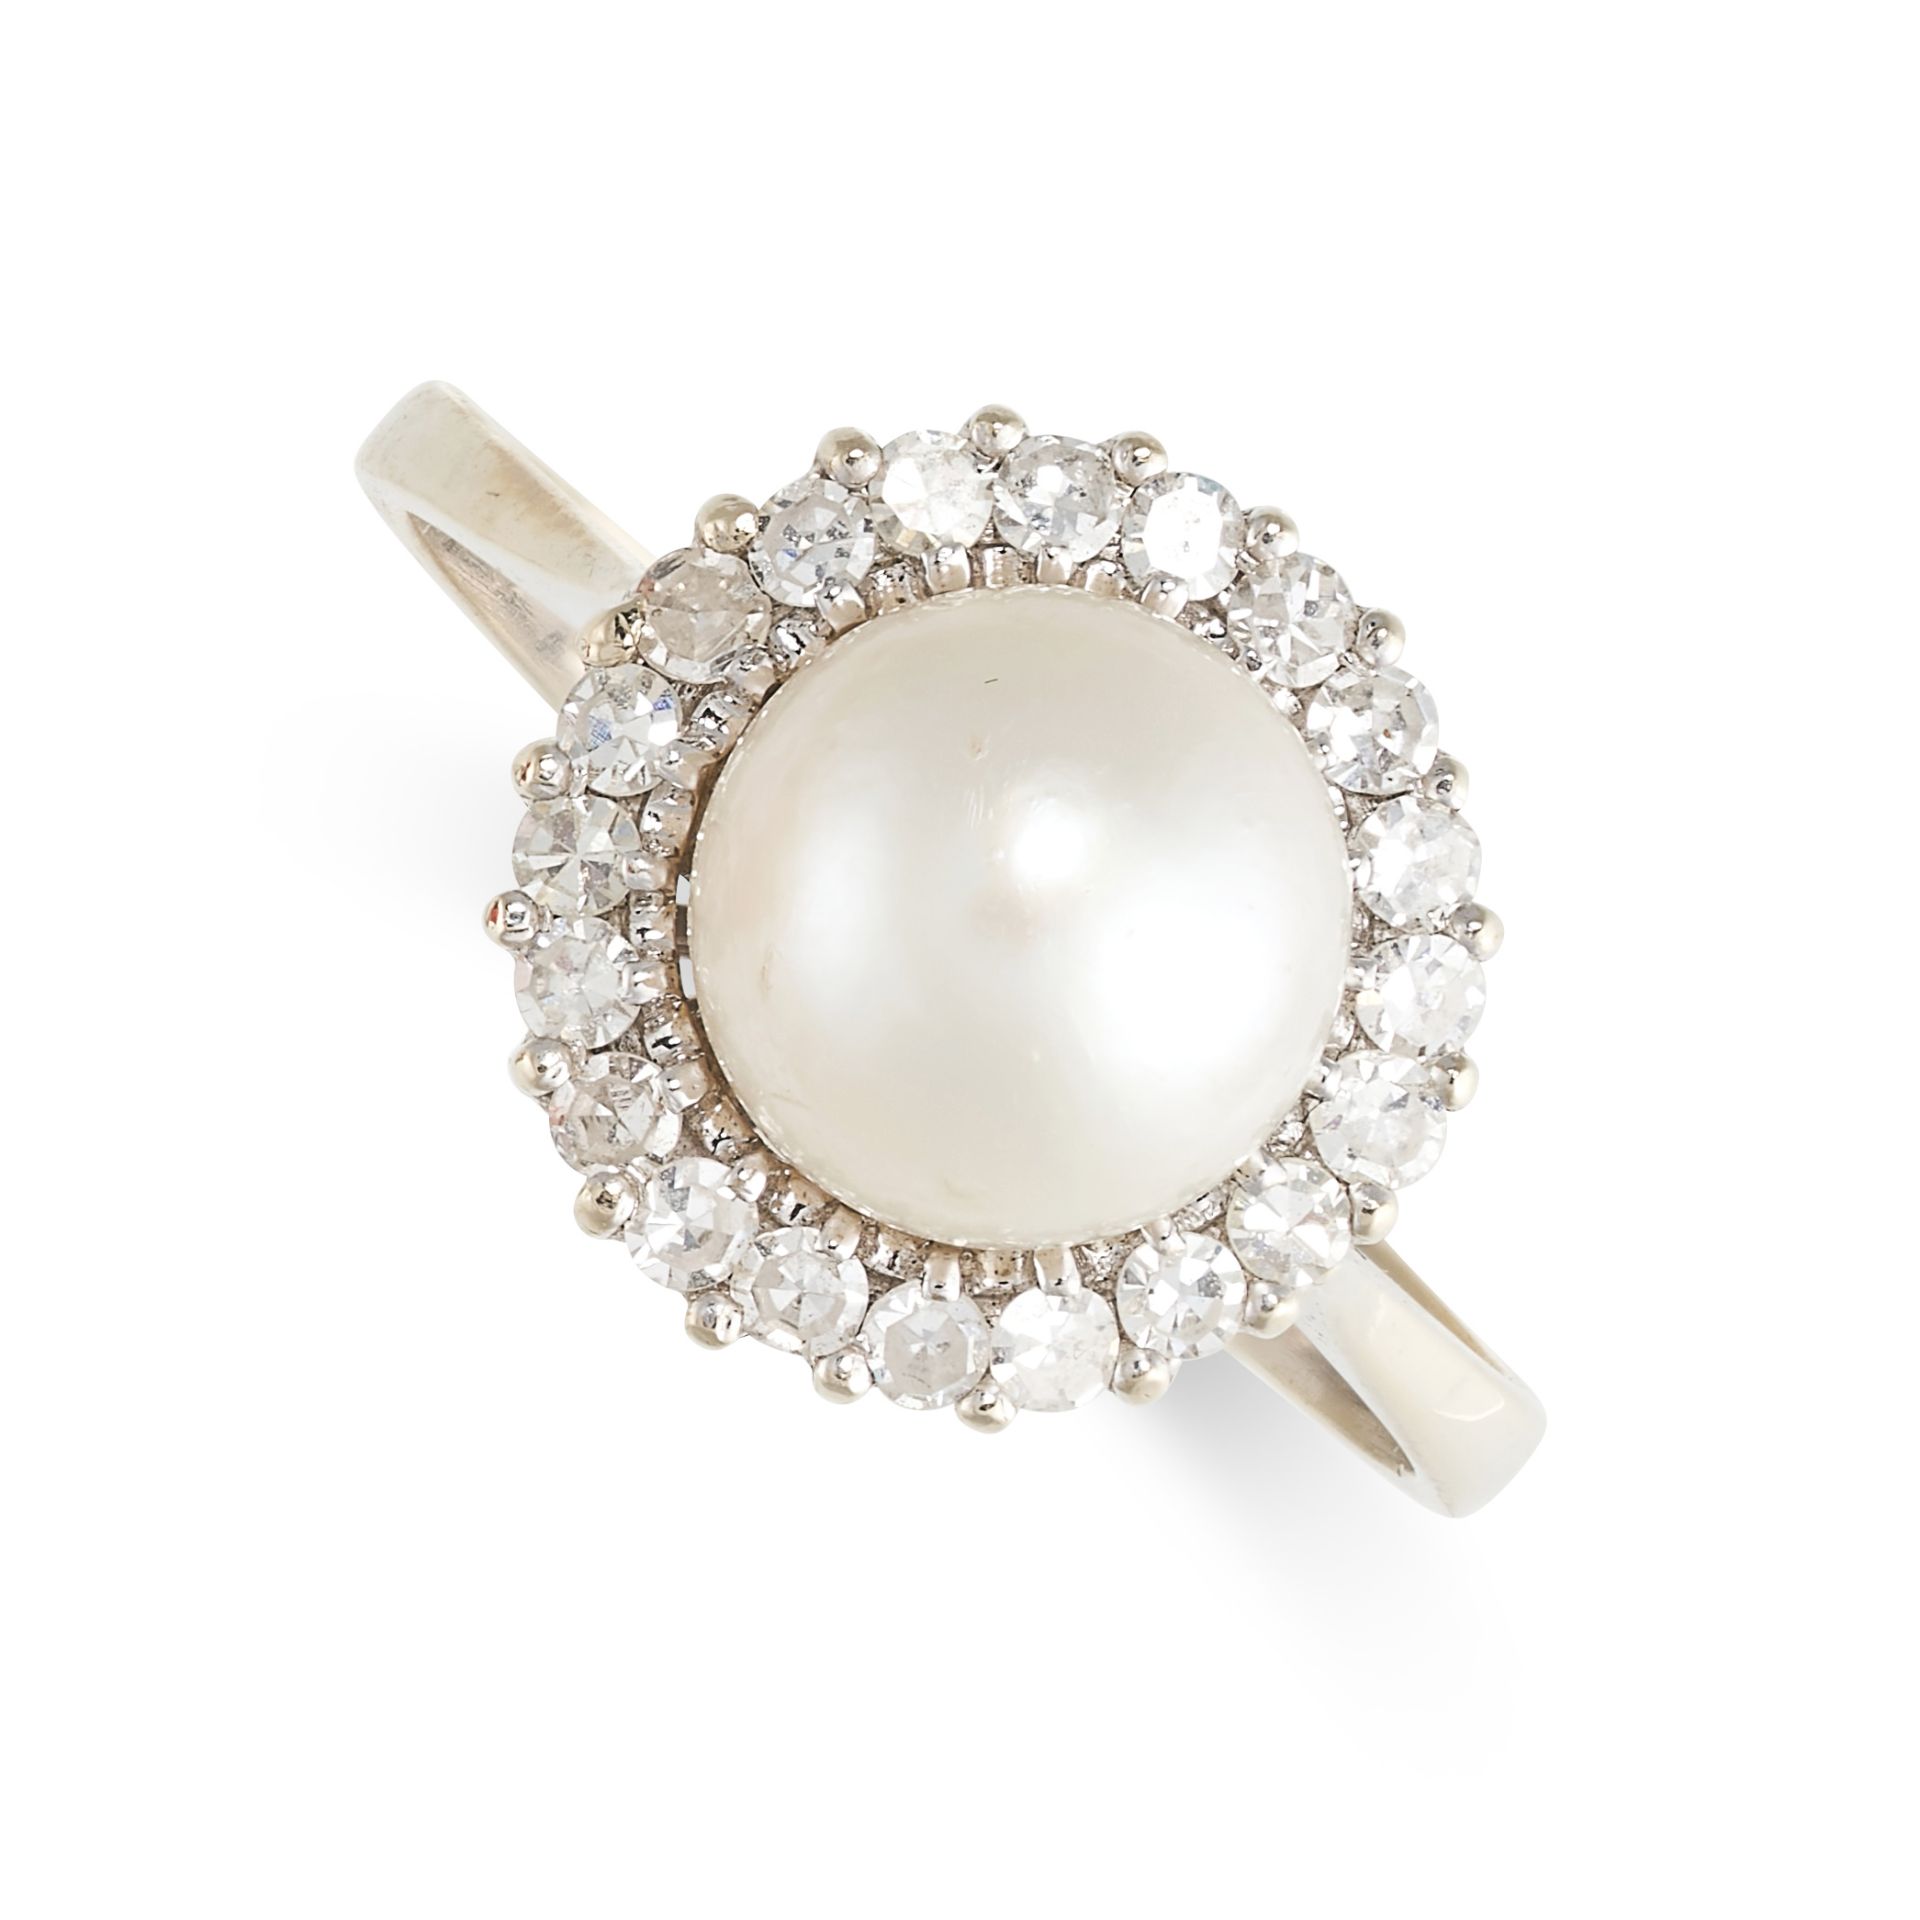 NO RESERVE - A PEARL AND DIAMOND CLUSTER RING  Made in 18 carat white gold  Pearl, approximate